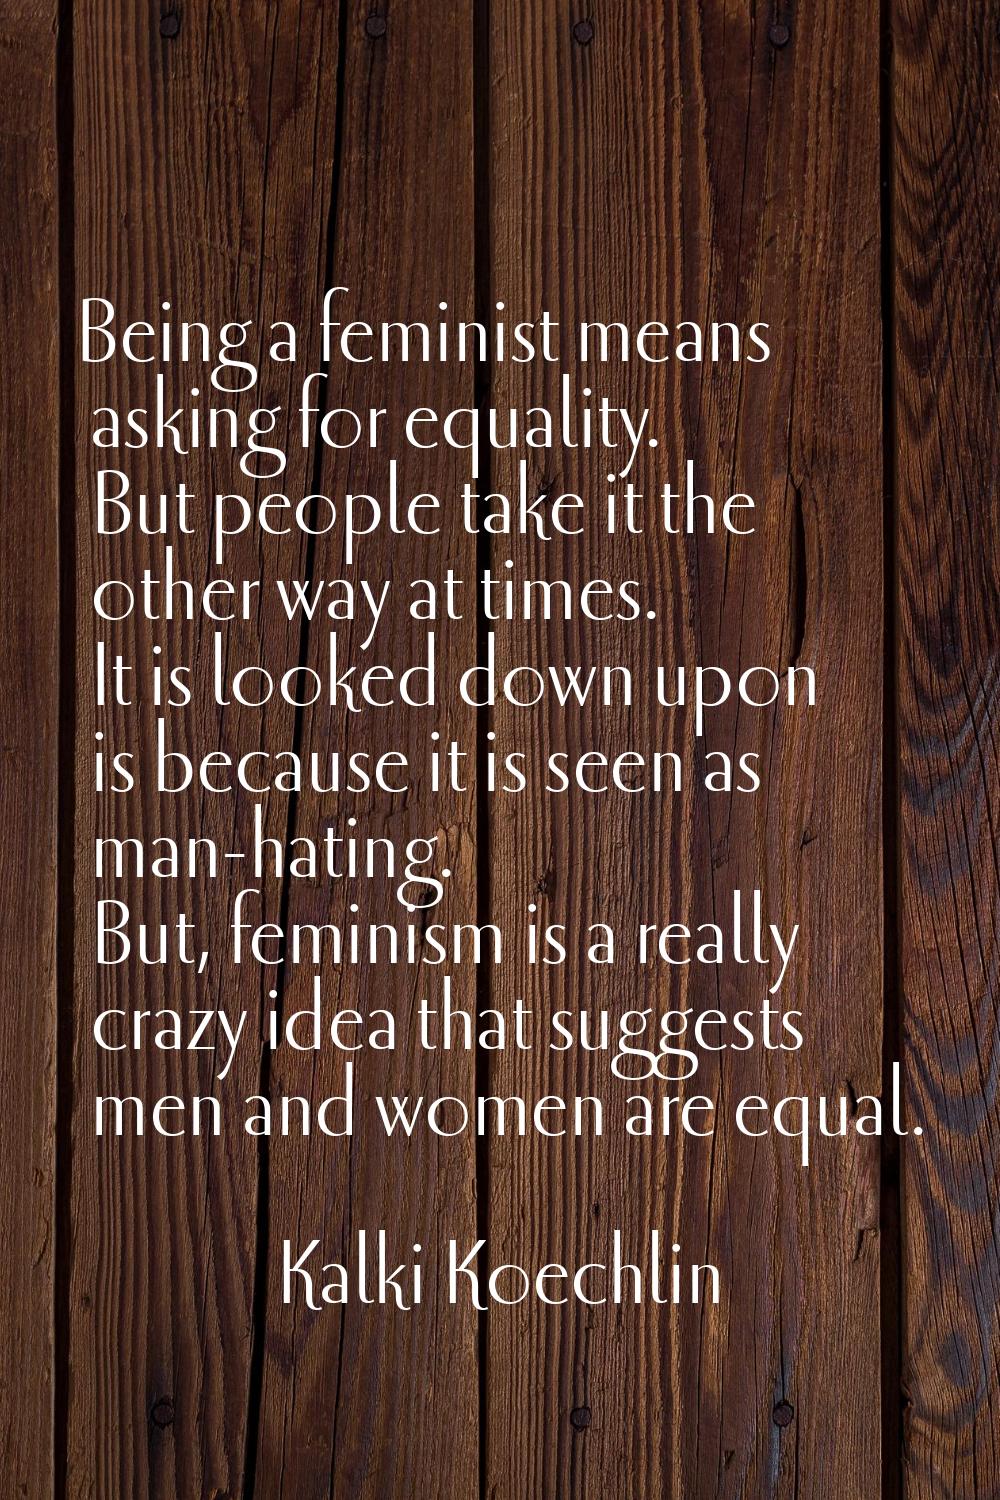 Being a feminist means asking for equality. But people take it the other way at times. It is looked